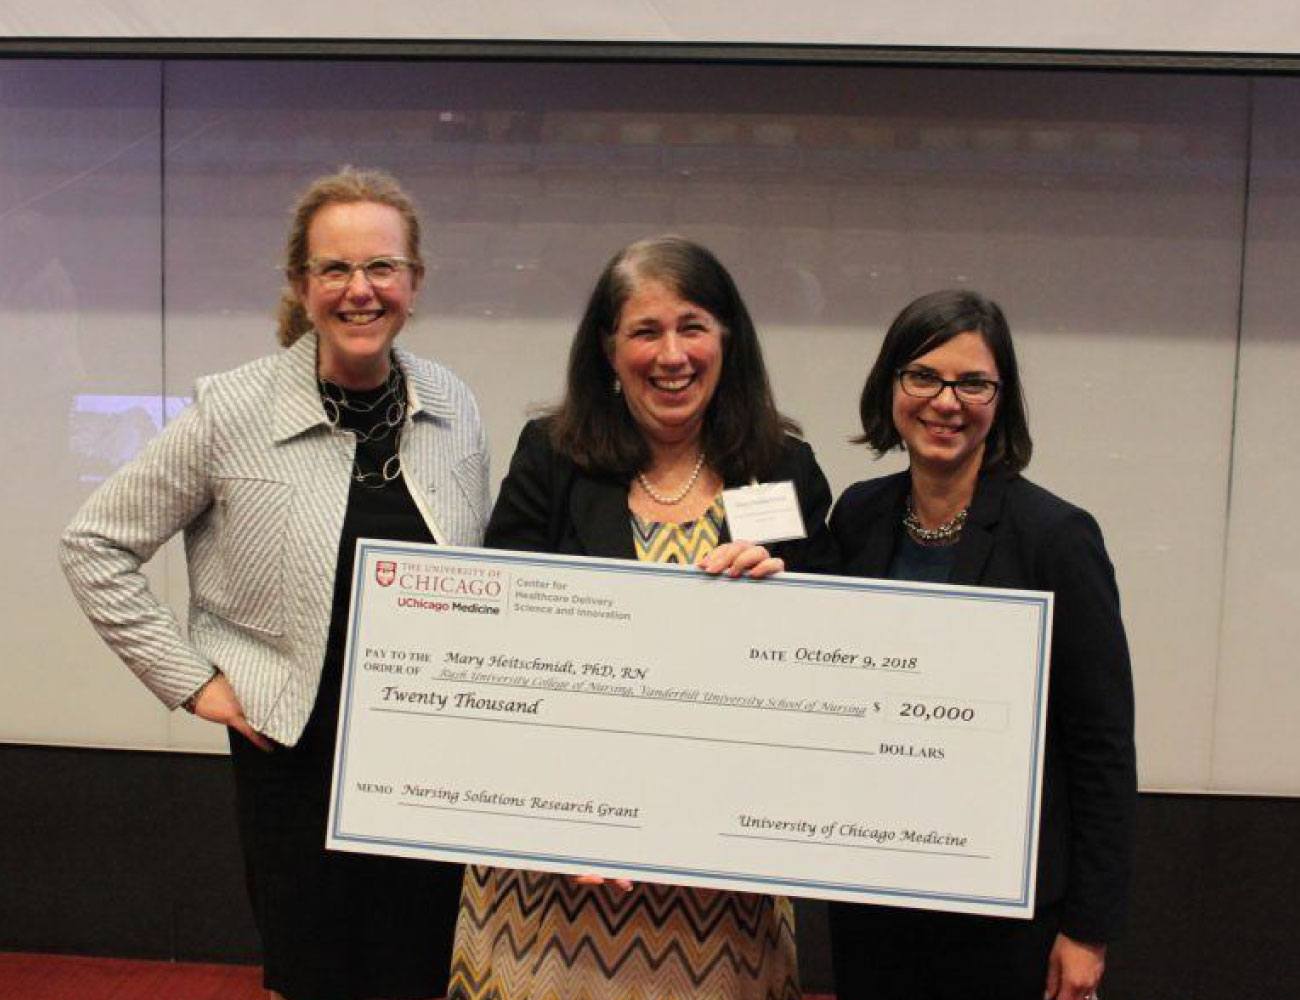 Mary Heitschmidt, 2018 Winner of Nursing Solutions Research Grant